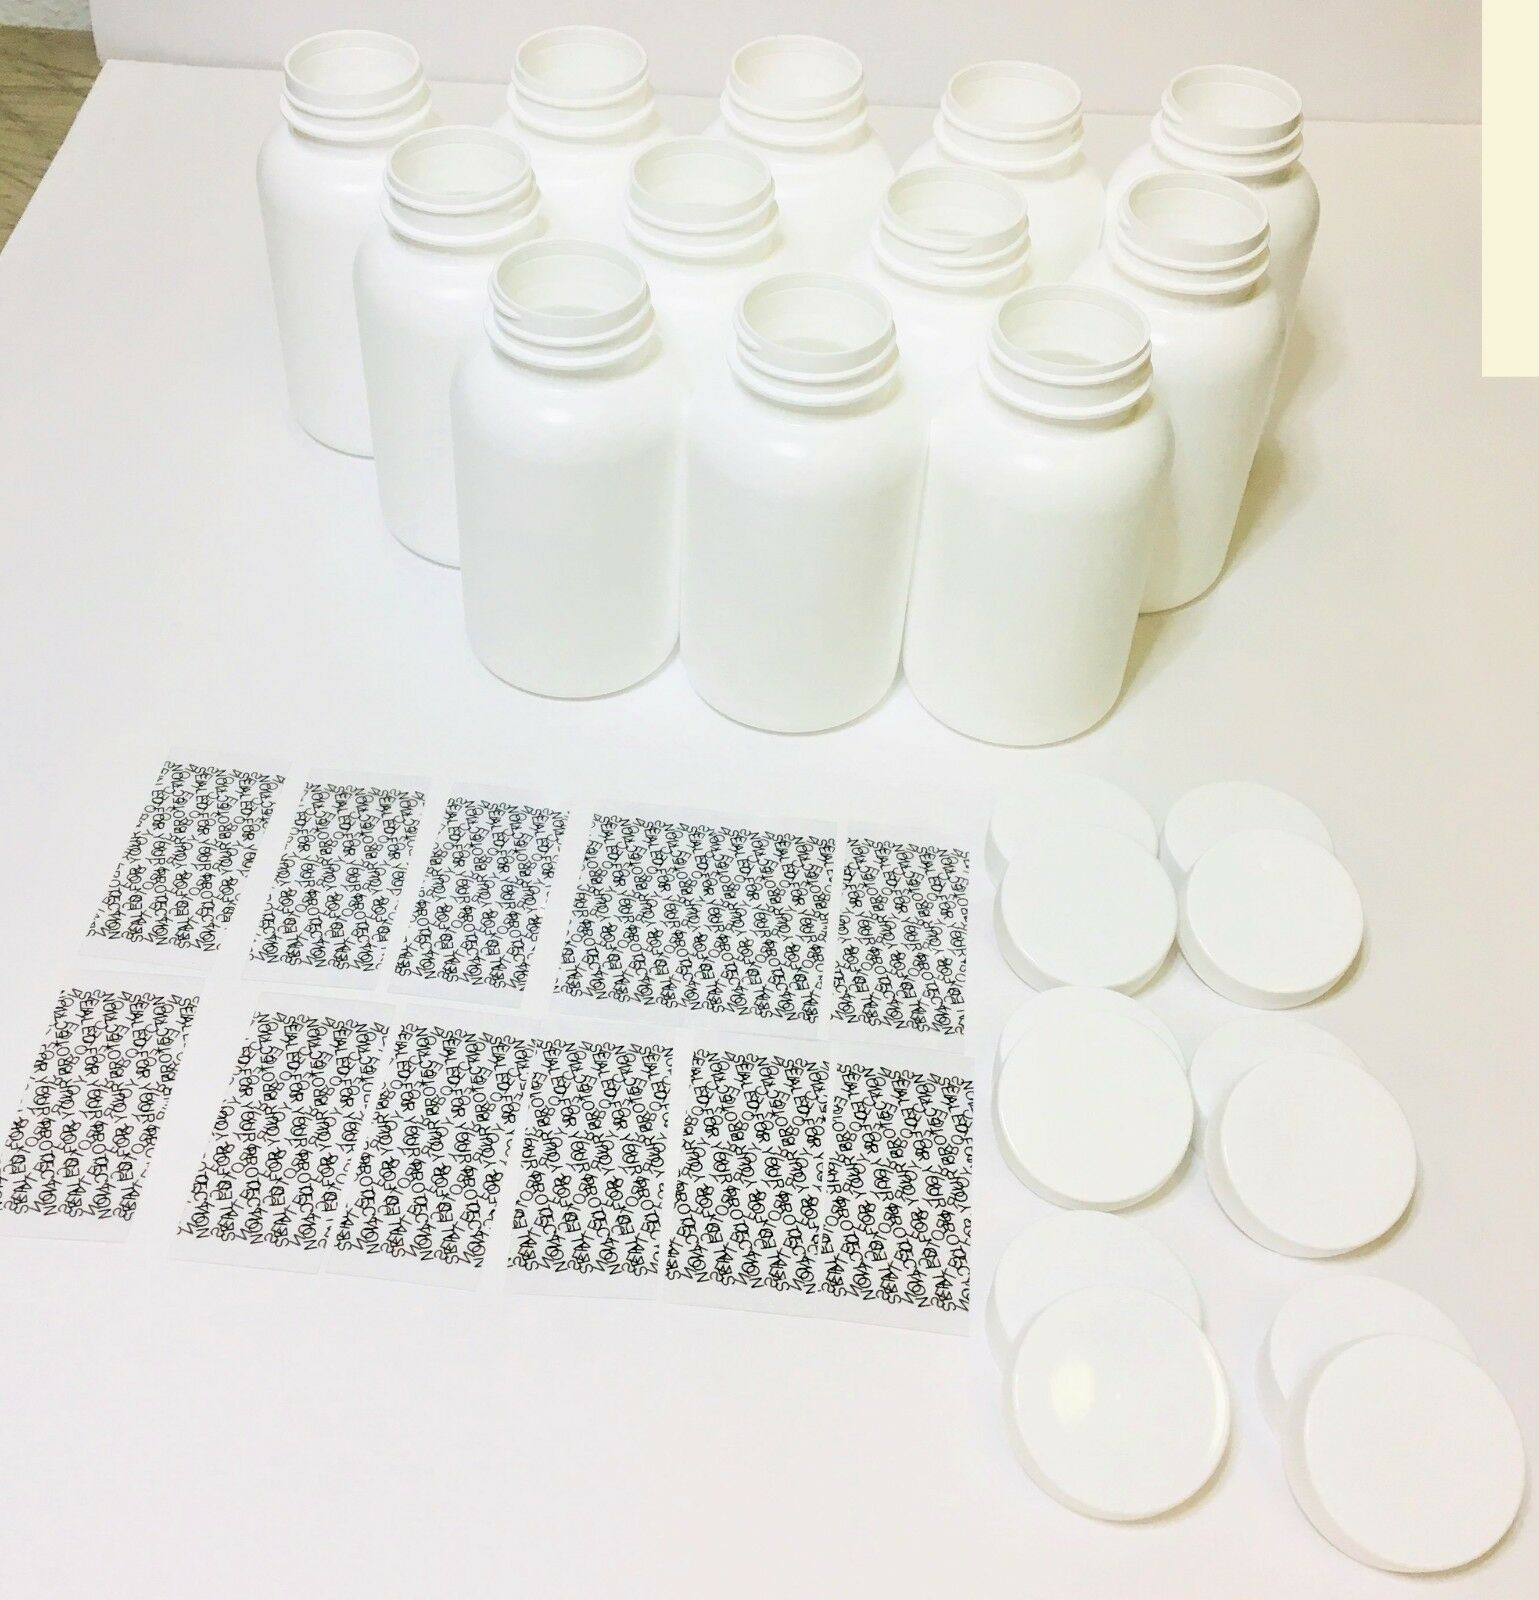 Plastic Bottles Set Of 12 Hdpe 175cc Pill Packer Bottle. With Caps And Seals.